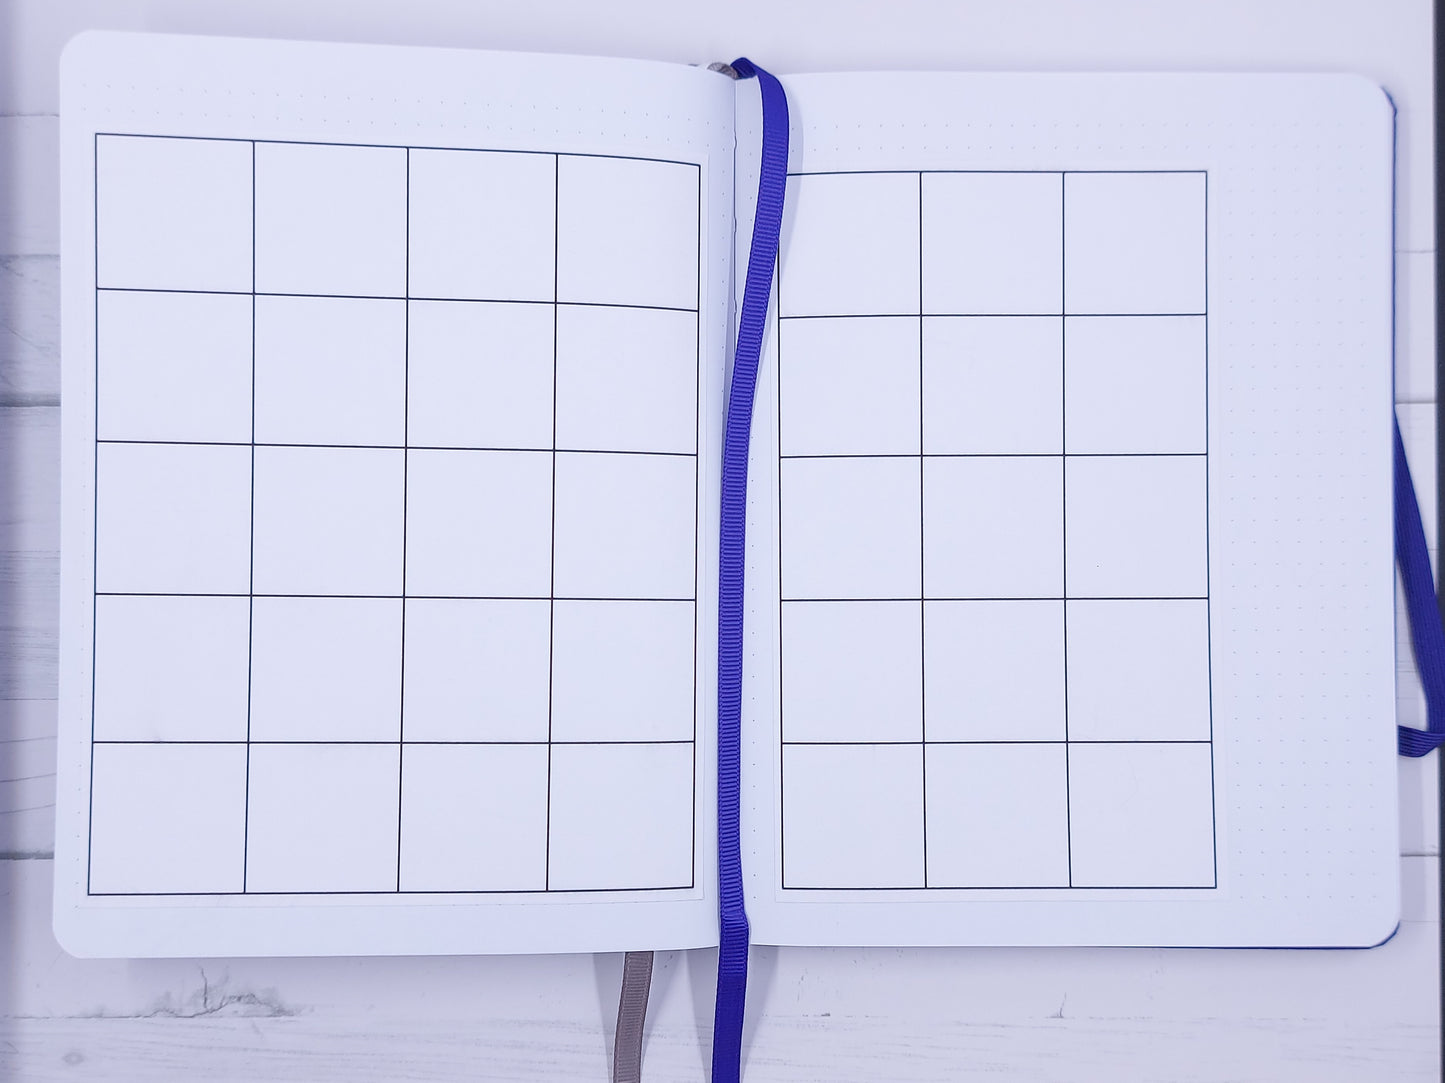 Calendar Grid for A5 Bullet Journals, 2 full page stickers per month